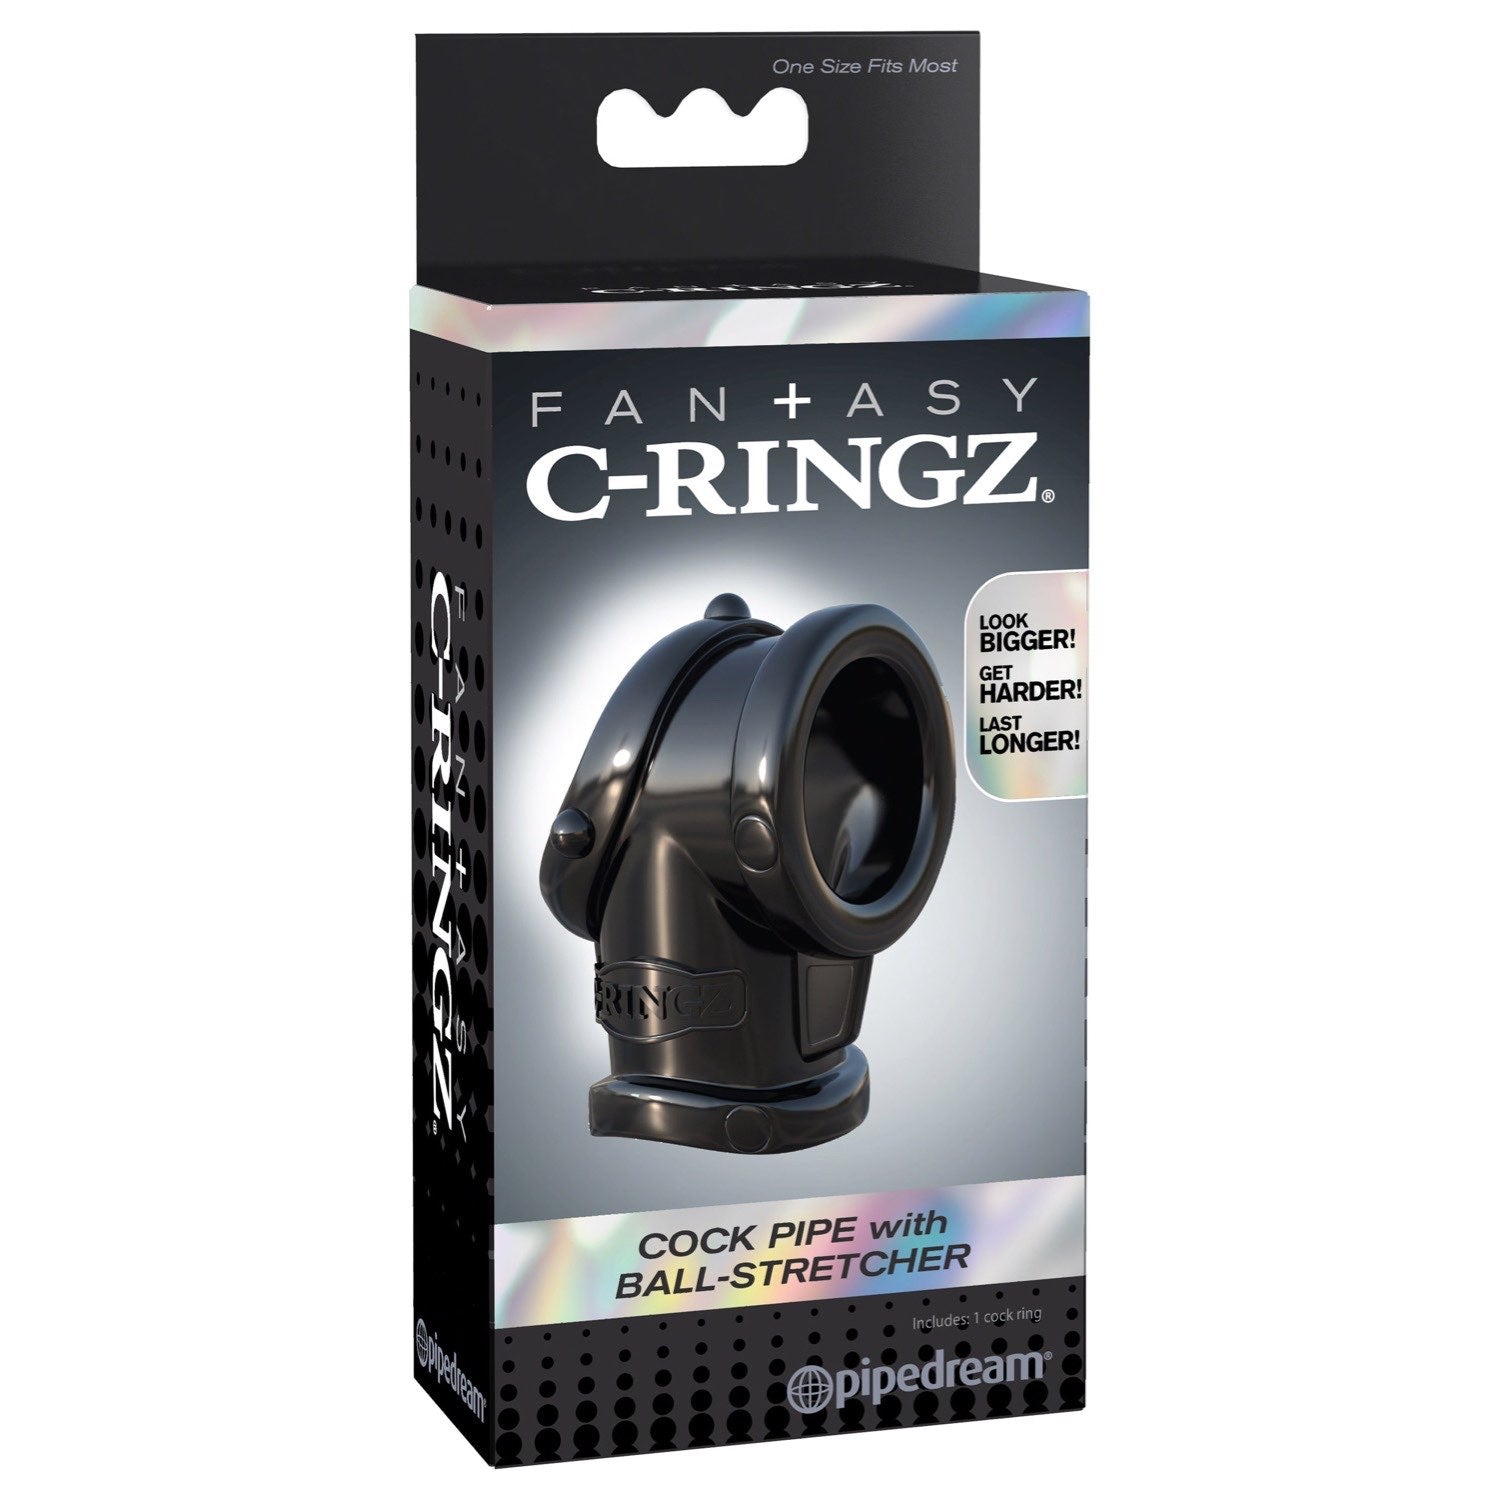 Fantasy C-Ringz Fantasy C-ringz Cock Pipe With Ball Stretcher - Black Cock &amp; Ball Rings by Pipedream